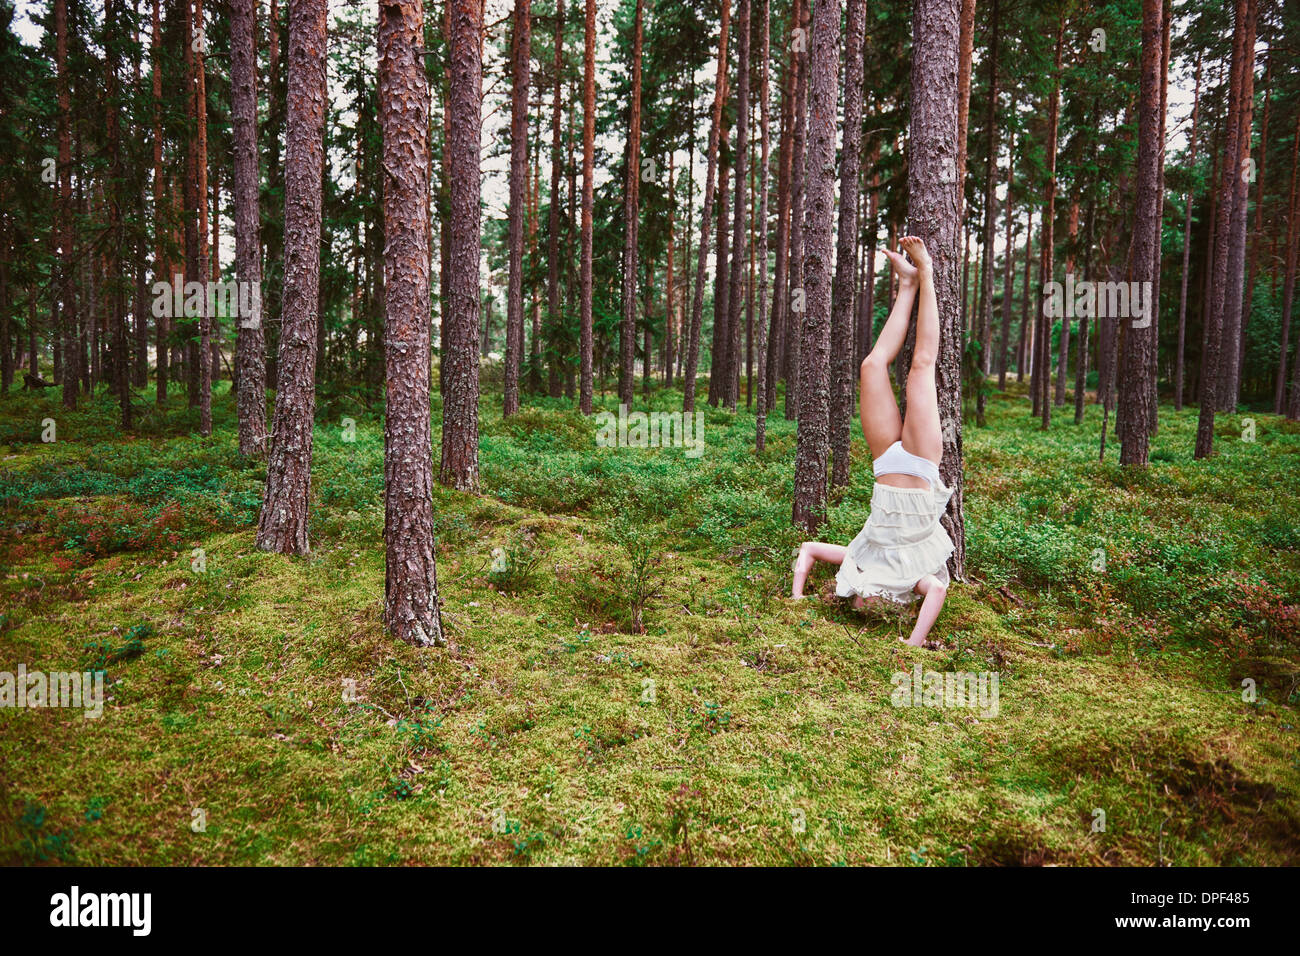 Young woman doing headstand against tree in forest Stock Photo